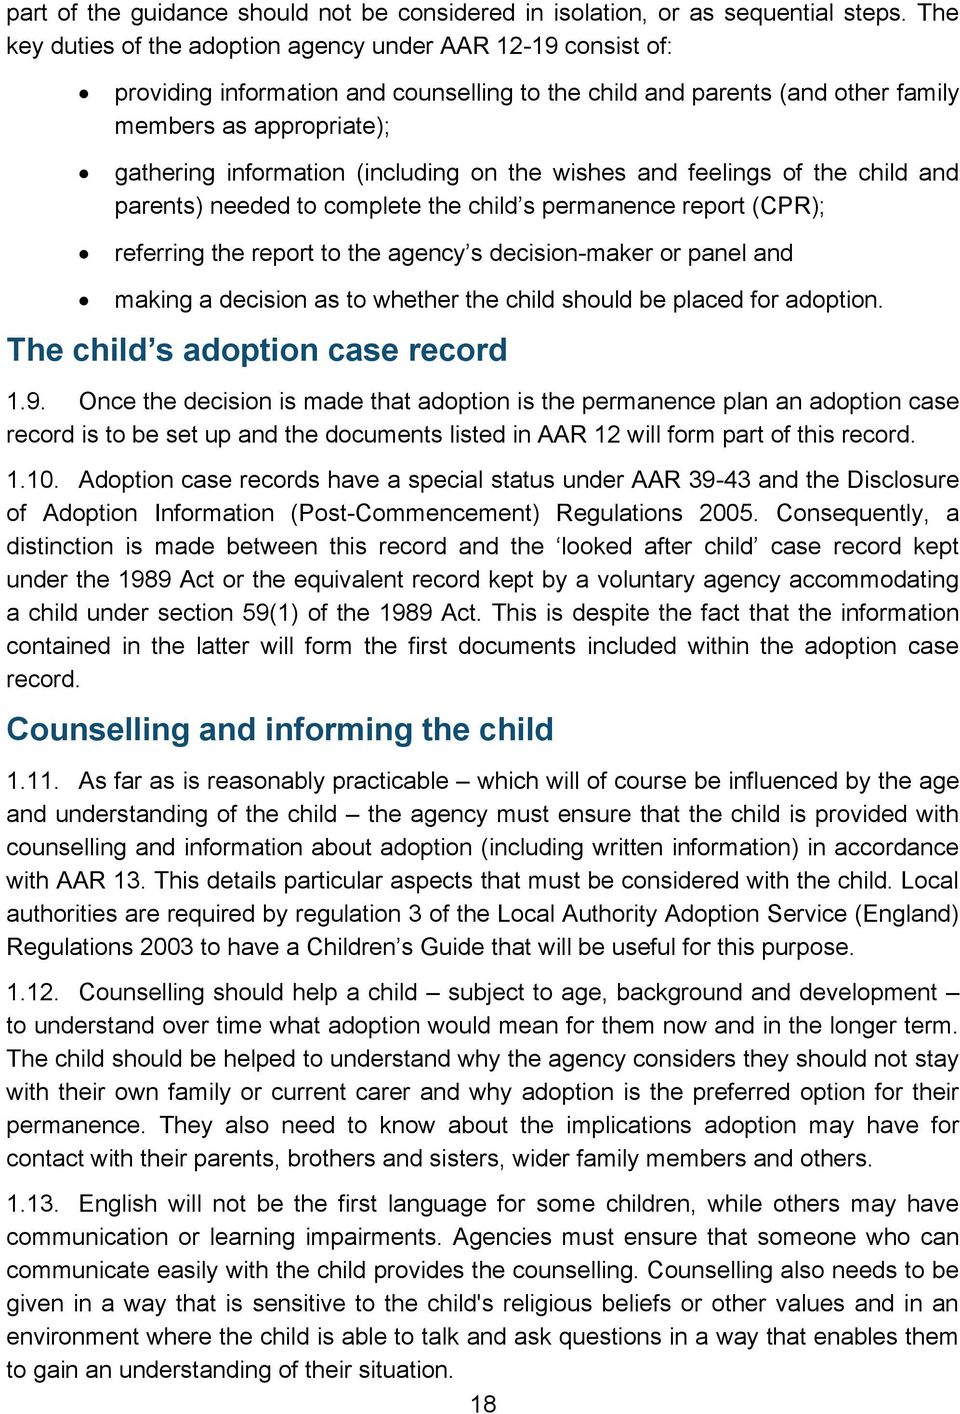 (including on the wishes and feelings of the child and parents) needed to complete the child s permanence report (CPR); referring the report to the agency s decision-maker or panel and making a